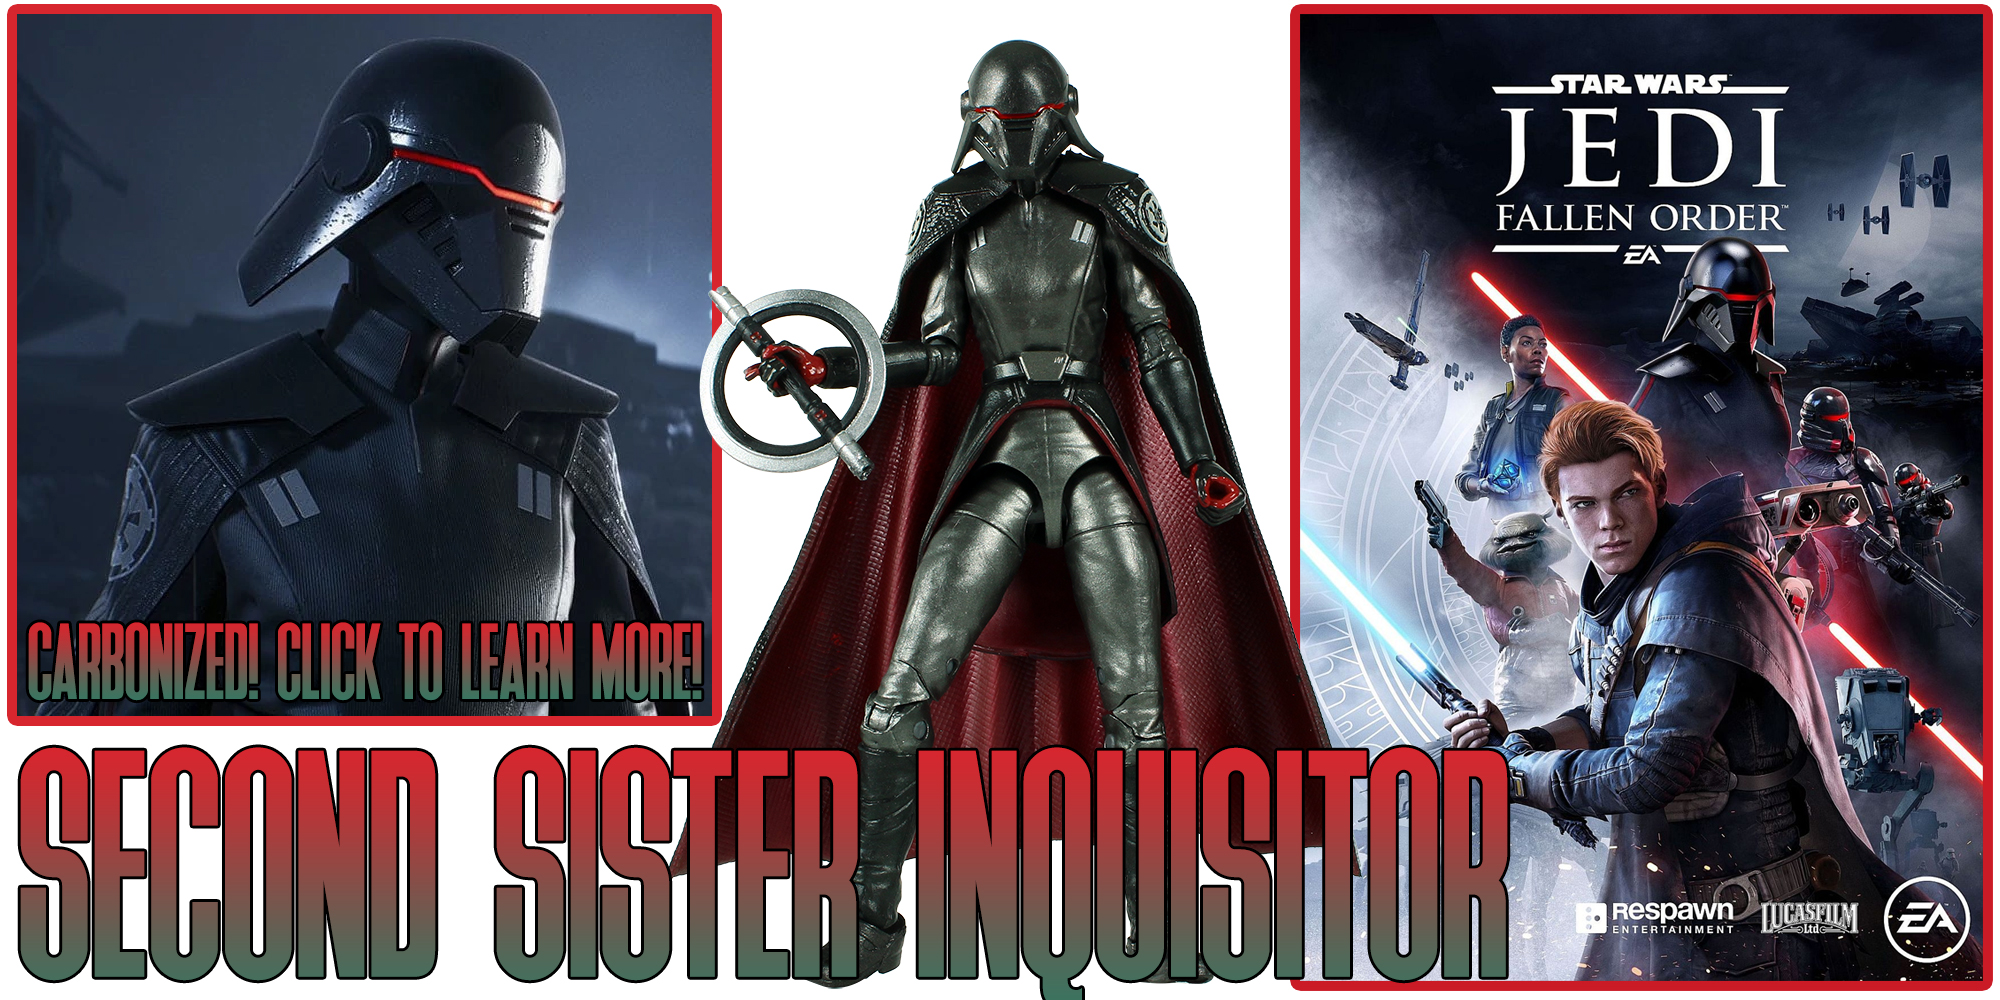 New Addition: Black Series Second Sister Inquisitor Carbonized